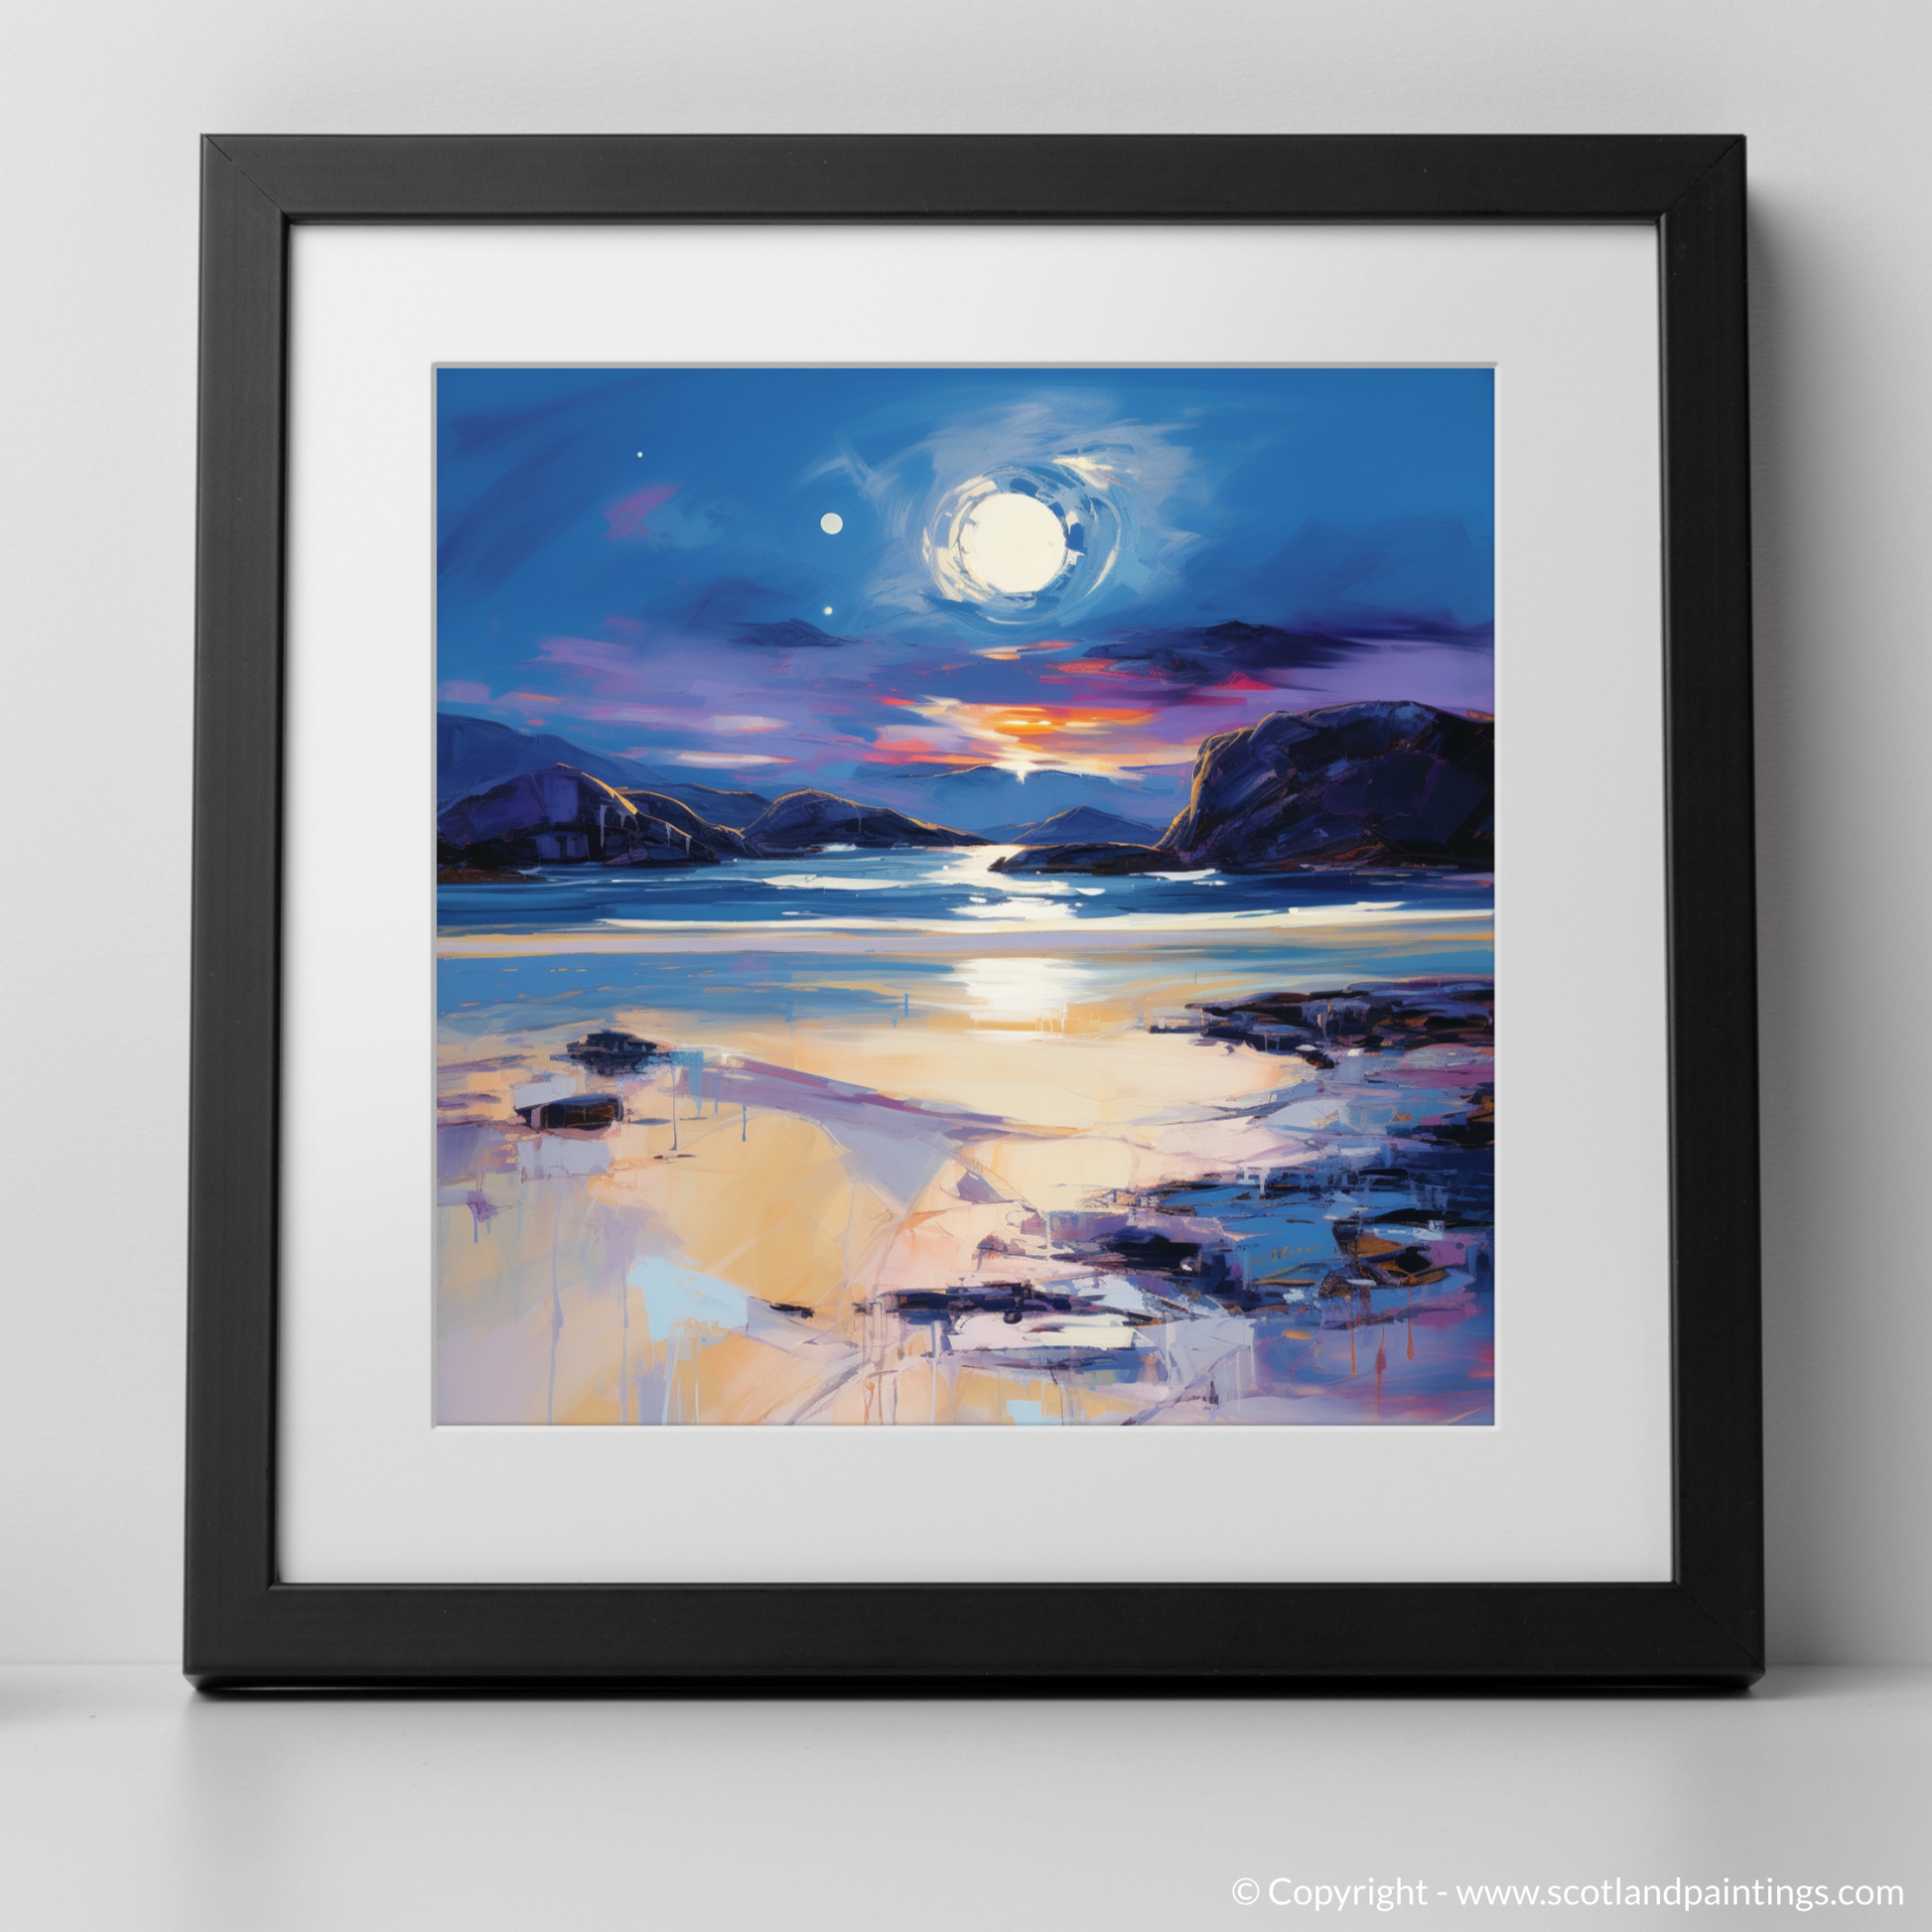 Art Print of Traigh Mhor at dusk with a black frame